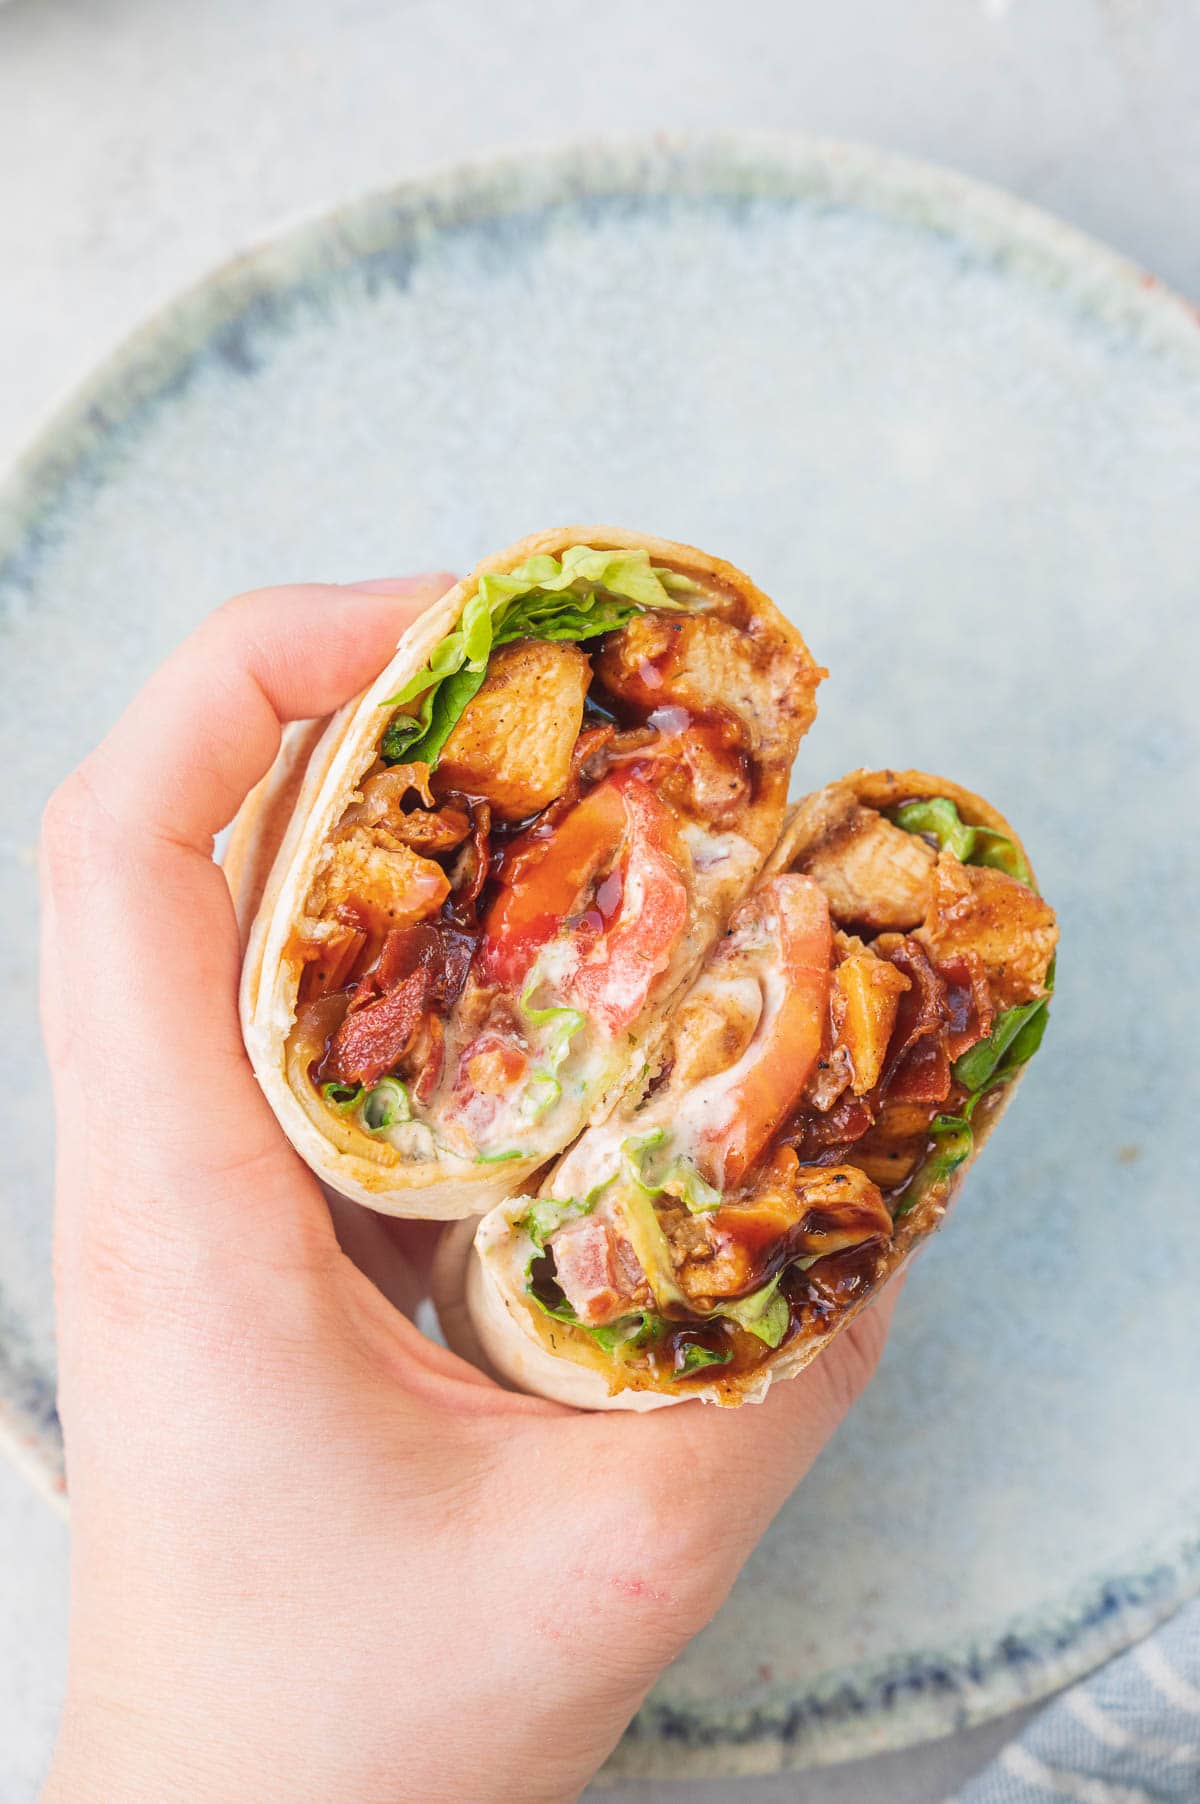 Two halfs of bbq chicken wraps held in a hand.